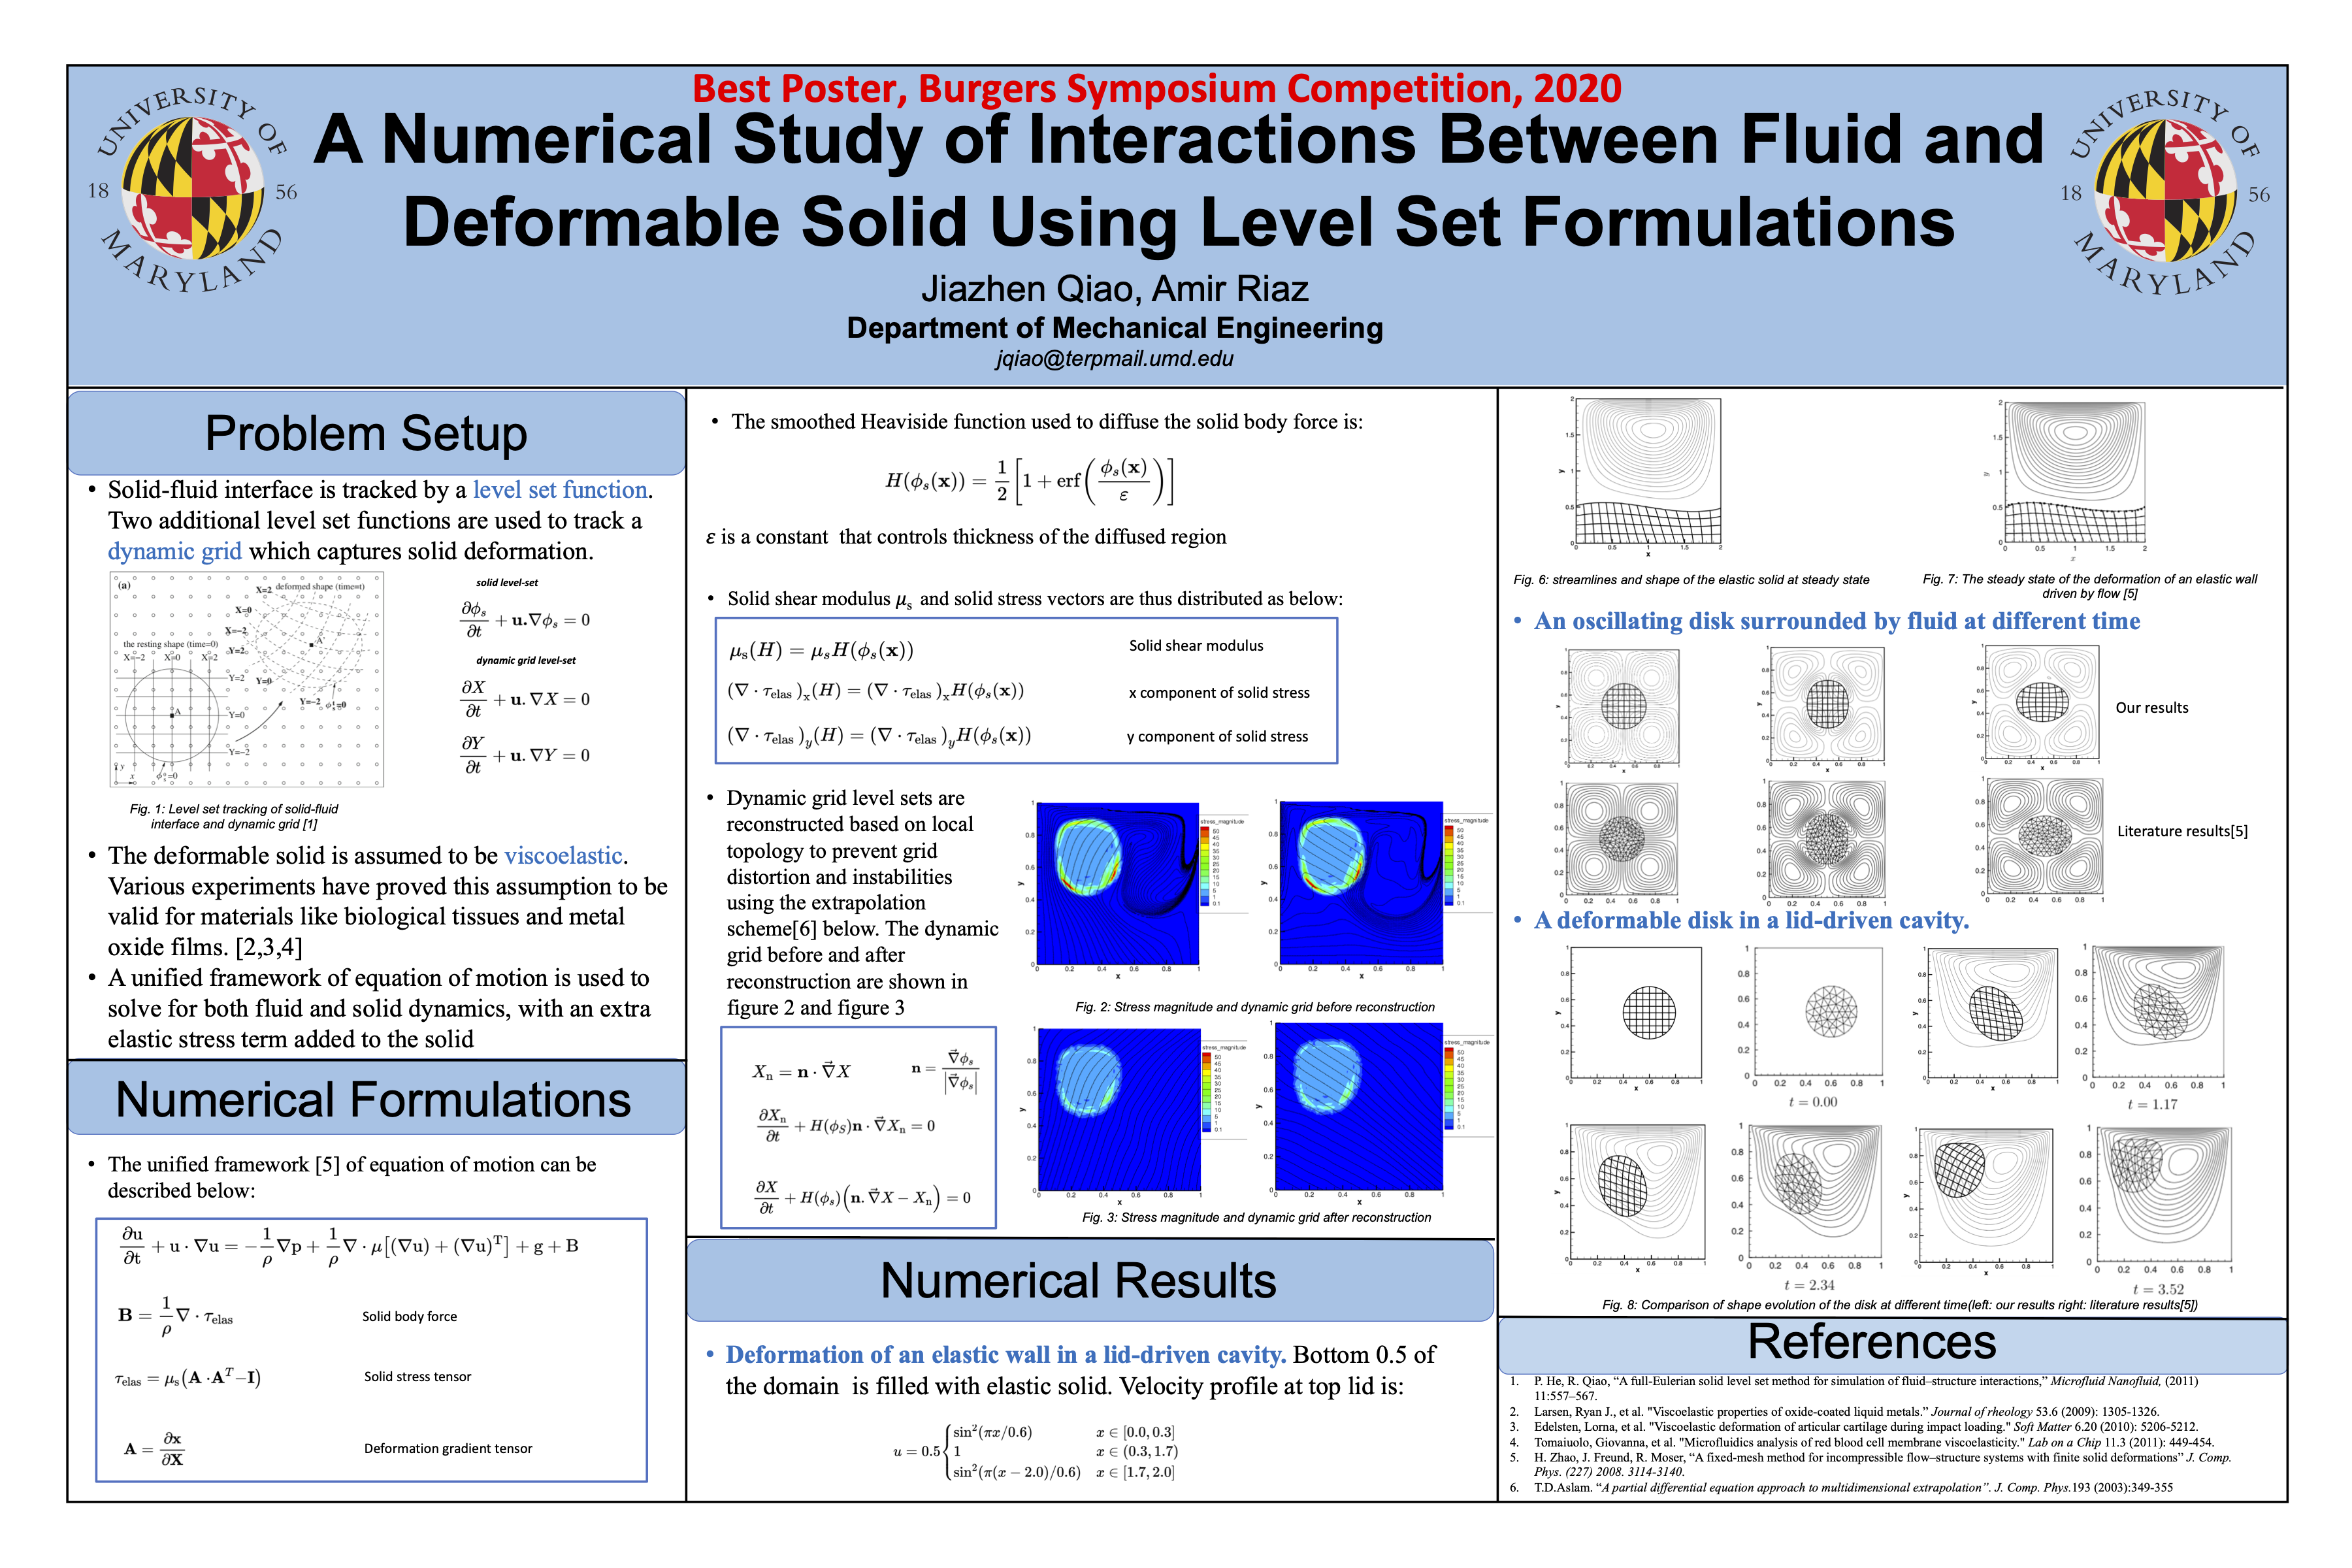 Best Poster: A Numerical Study of Interactions Between Fluid and Deformable Solid Using Level Set Formulations